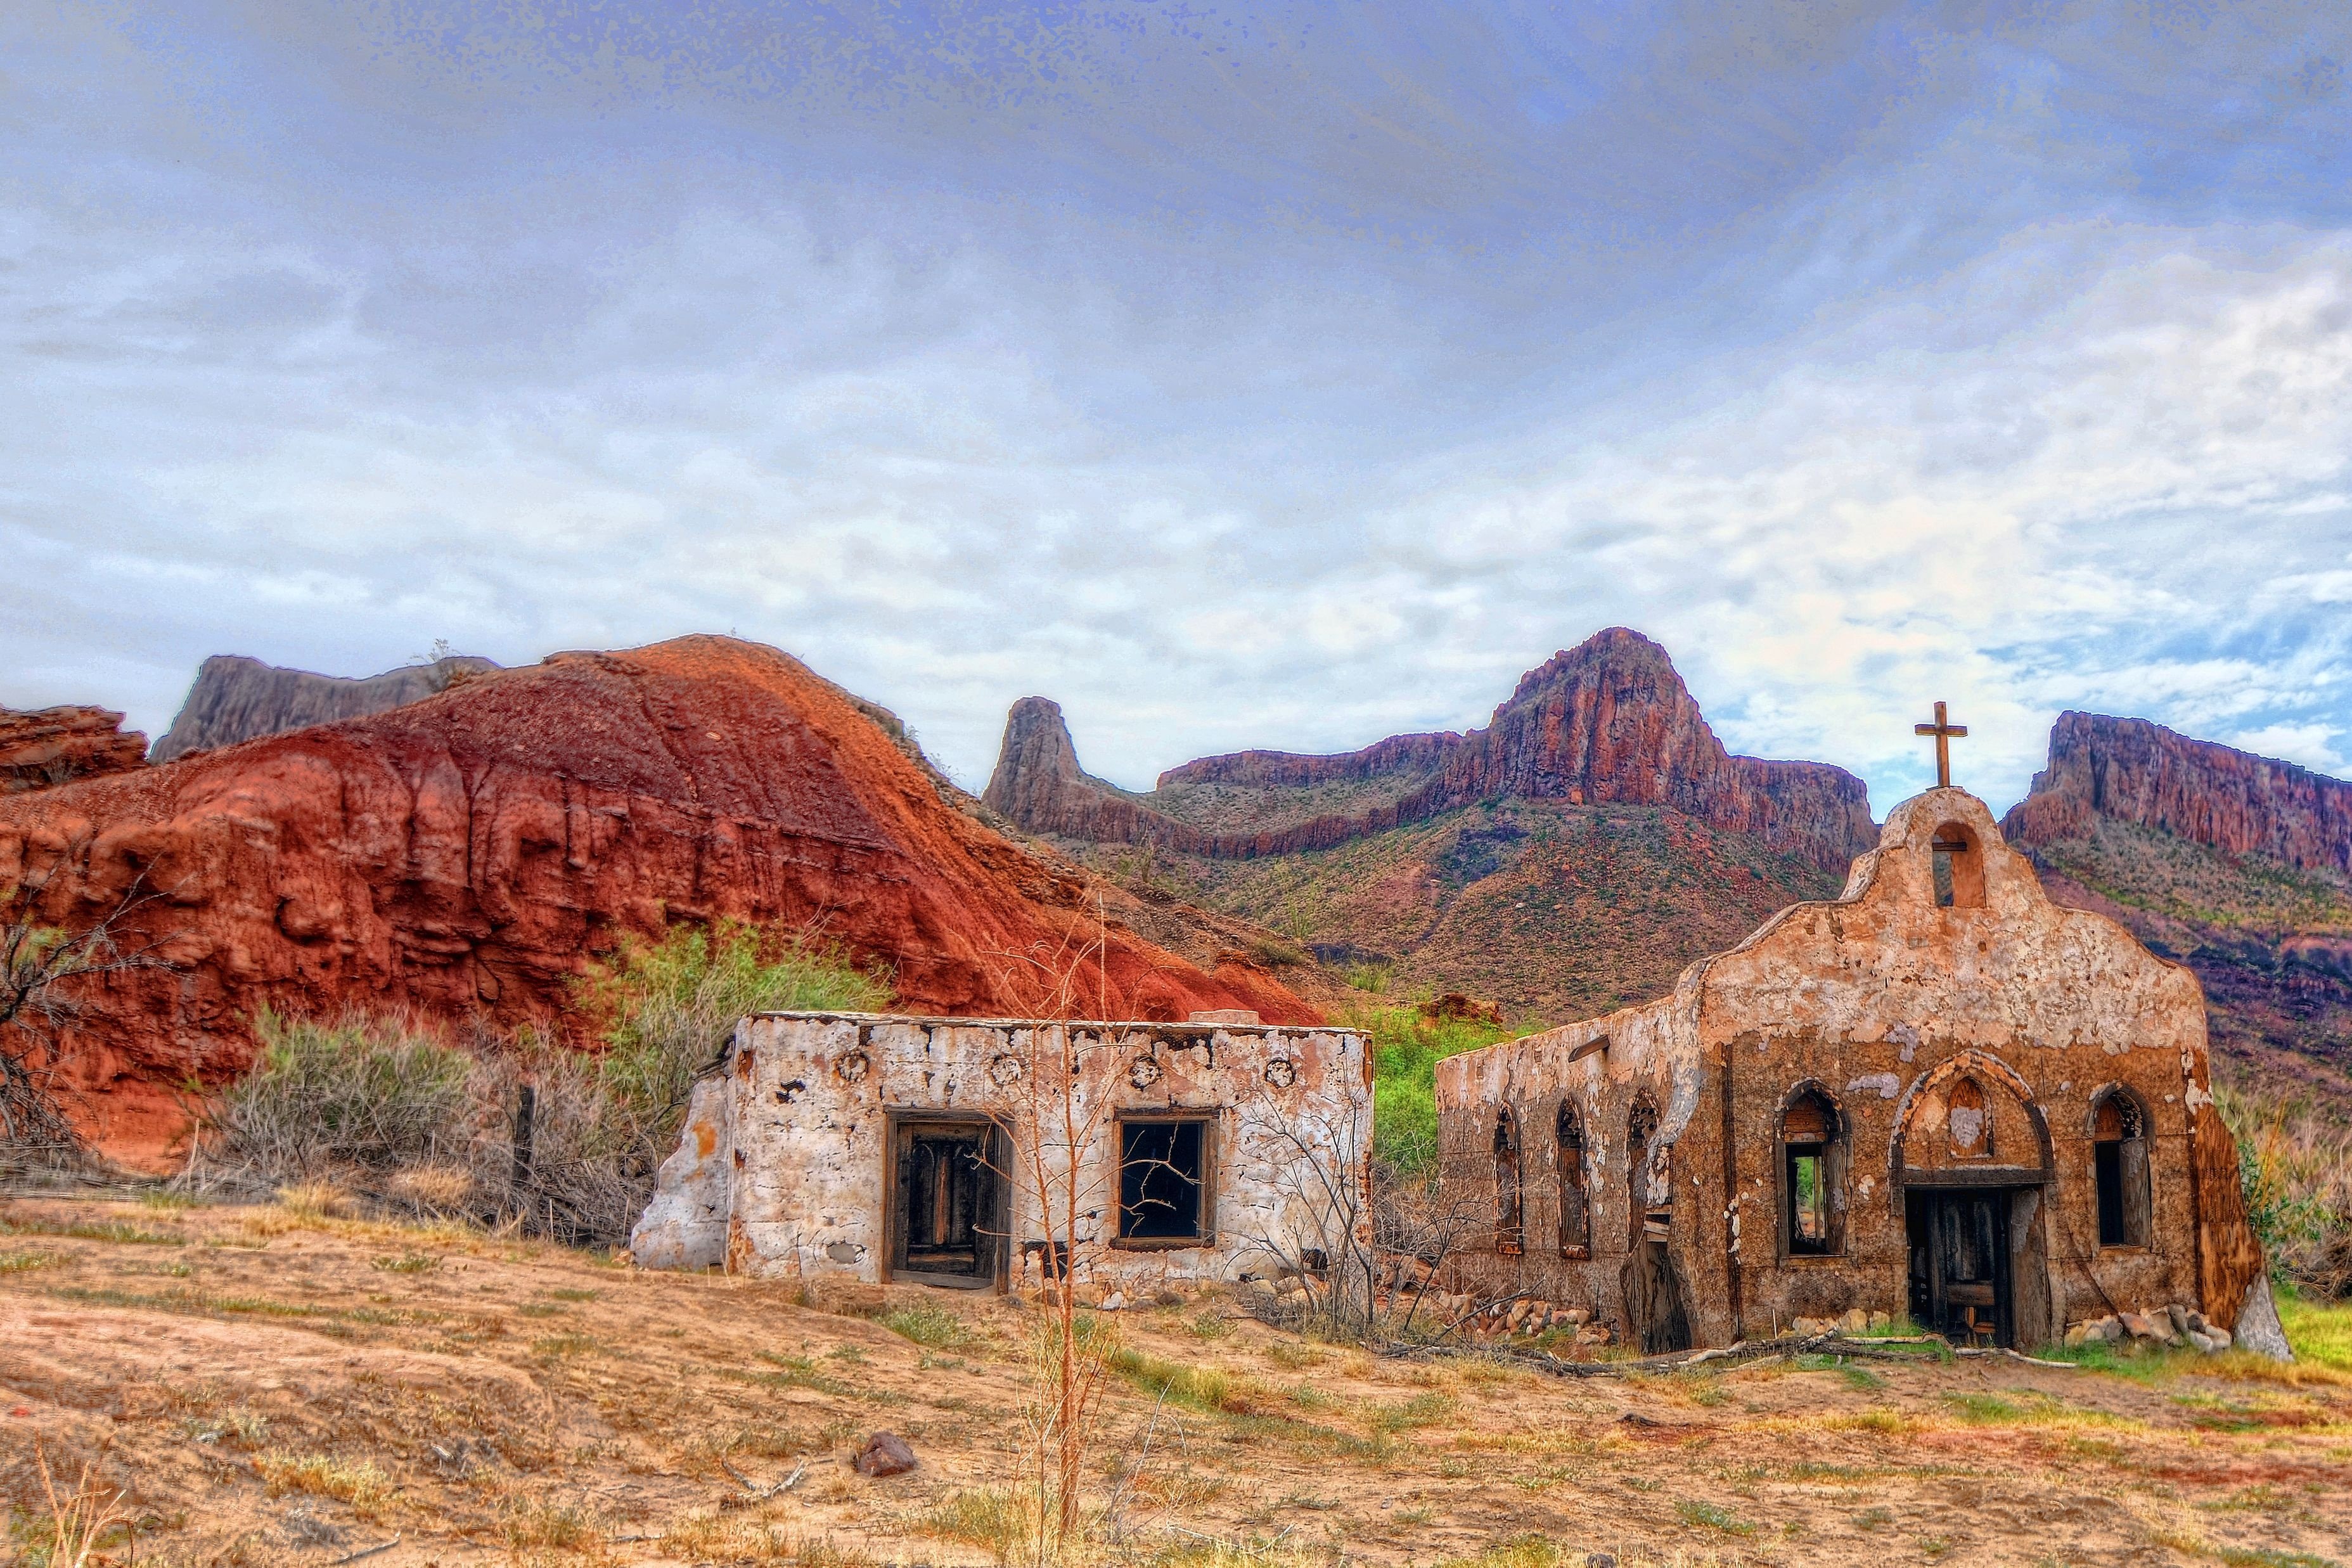 Big bend ranch state park texas desert ruins western church building wallpapers hd desktop and mobile backgrounds